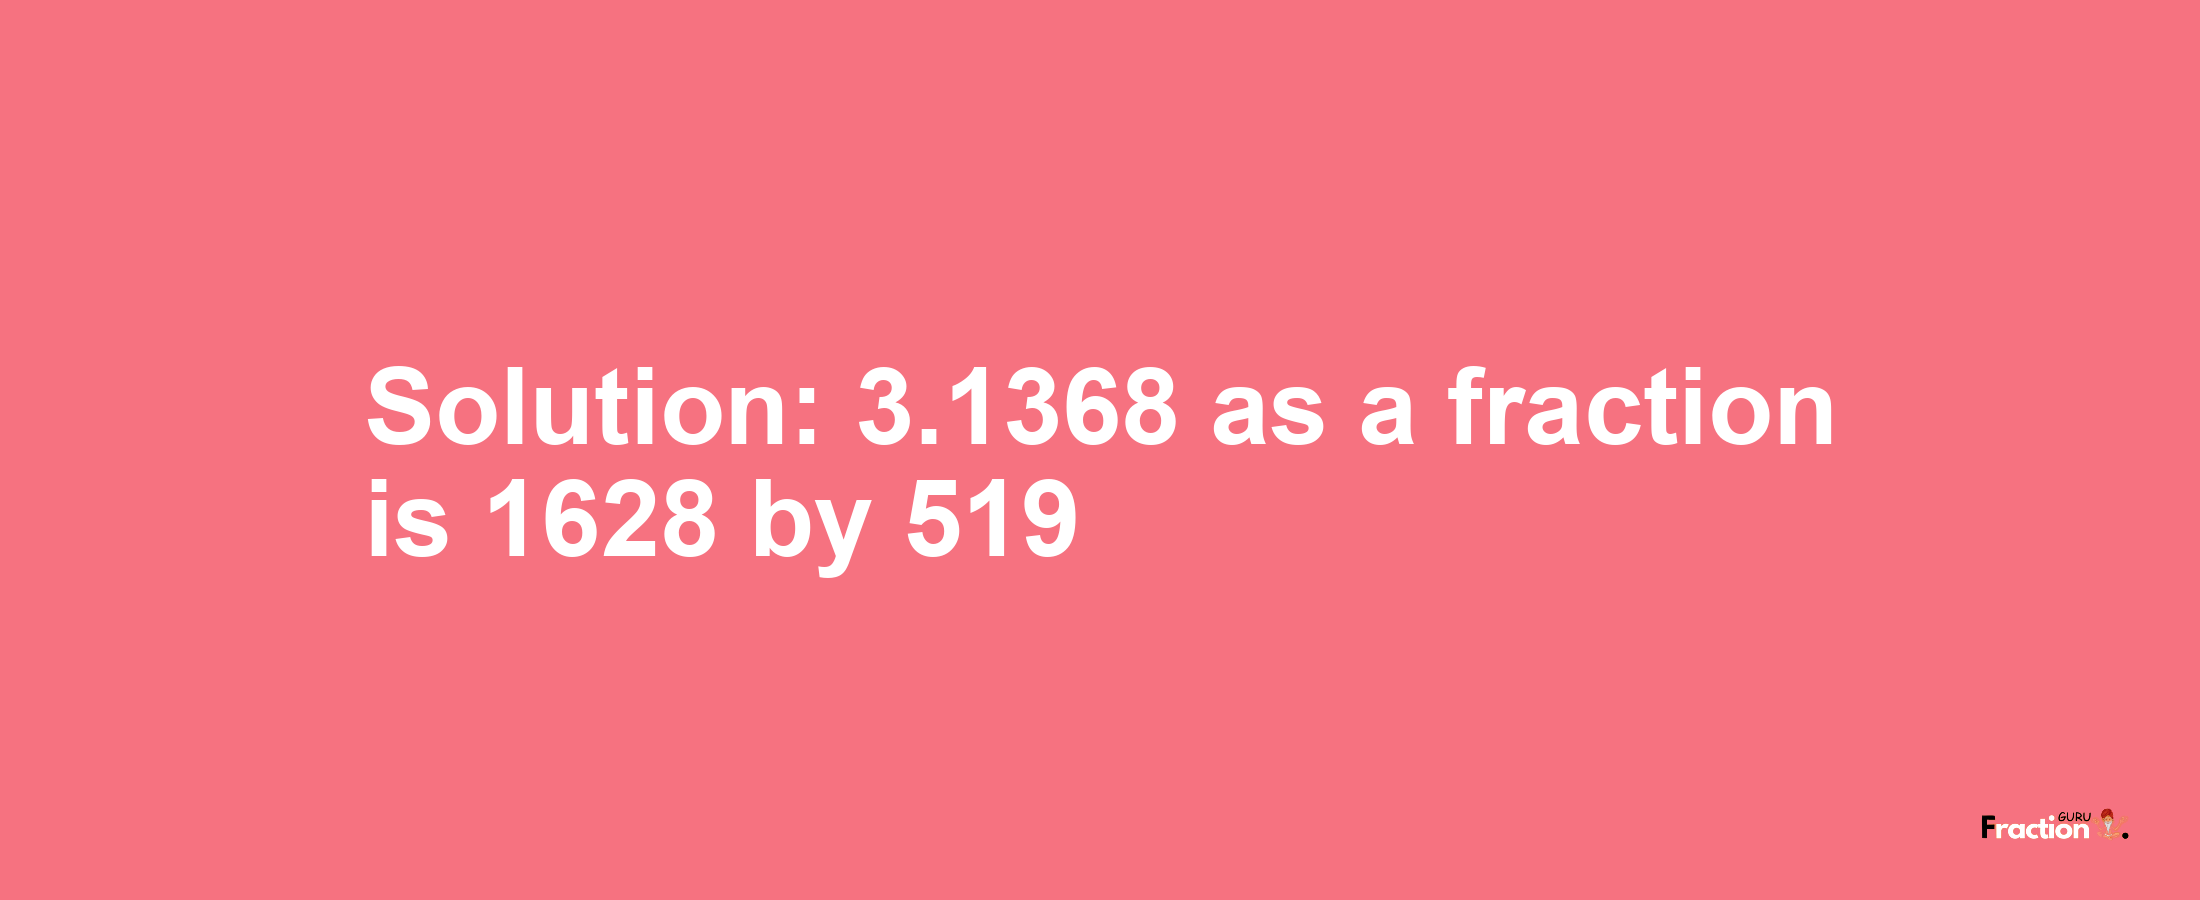 Solution:3.1368 as a fraction is 1628/519